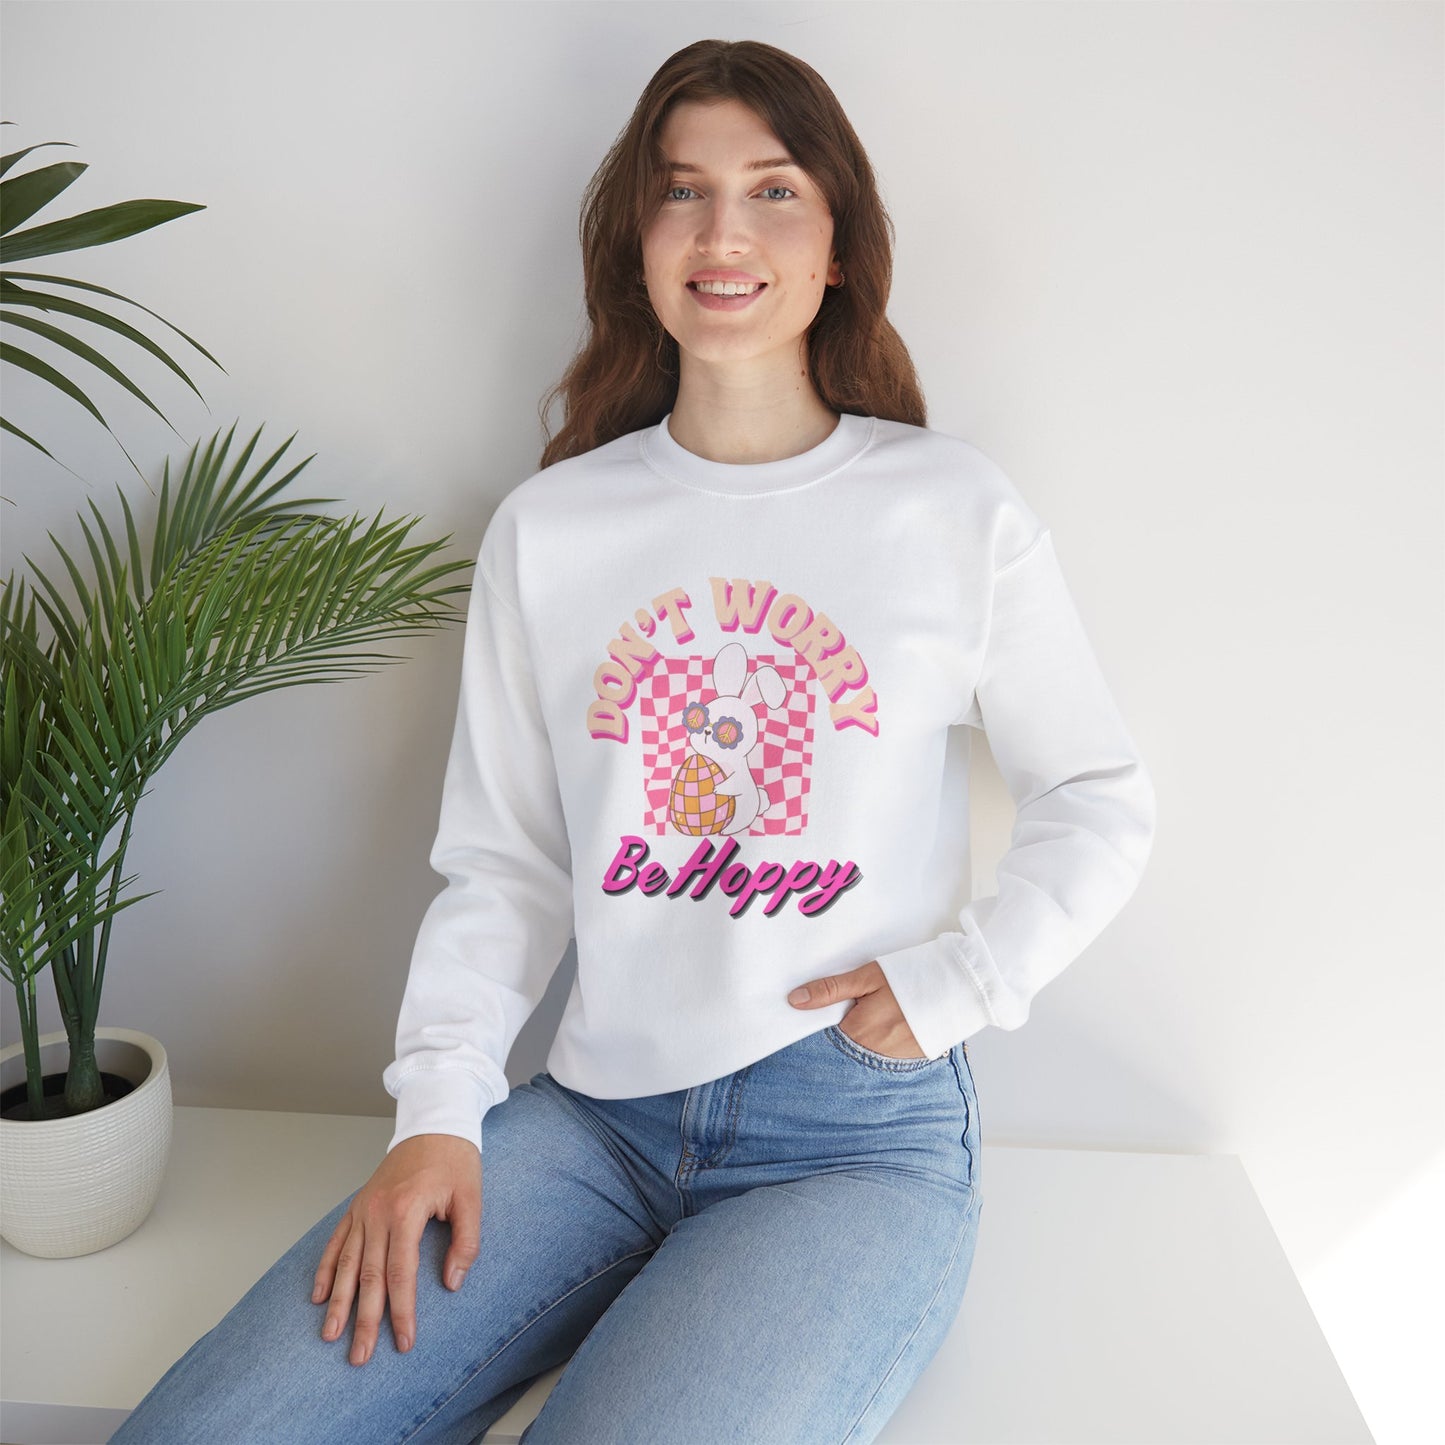 BE HOPPY round-neck sweatshirt for Easter - adult